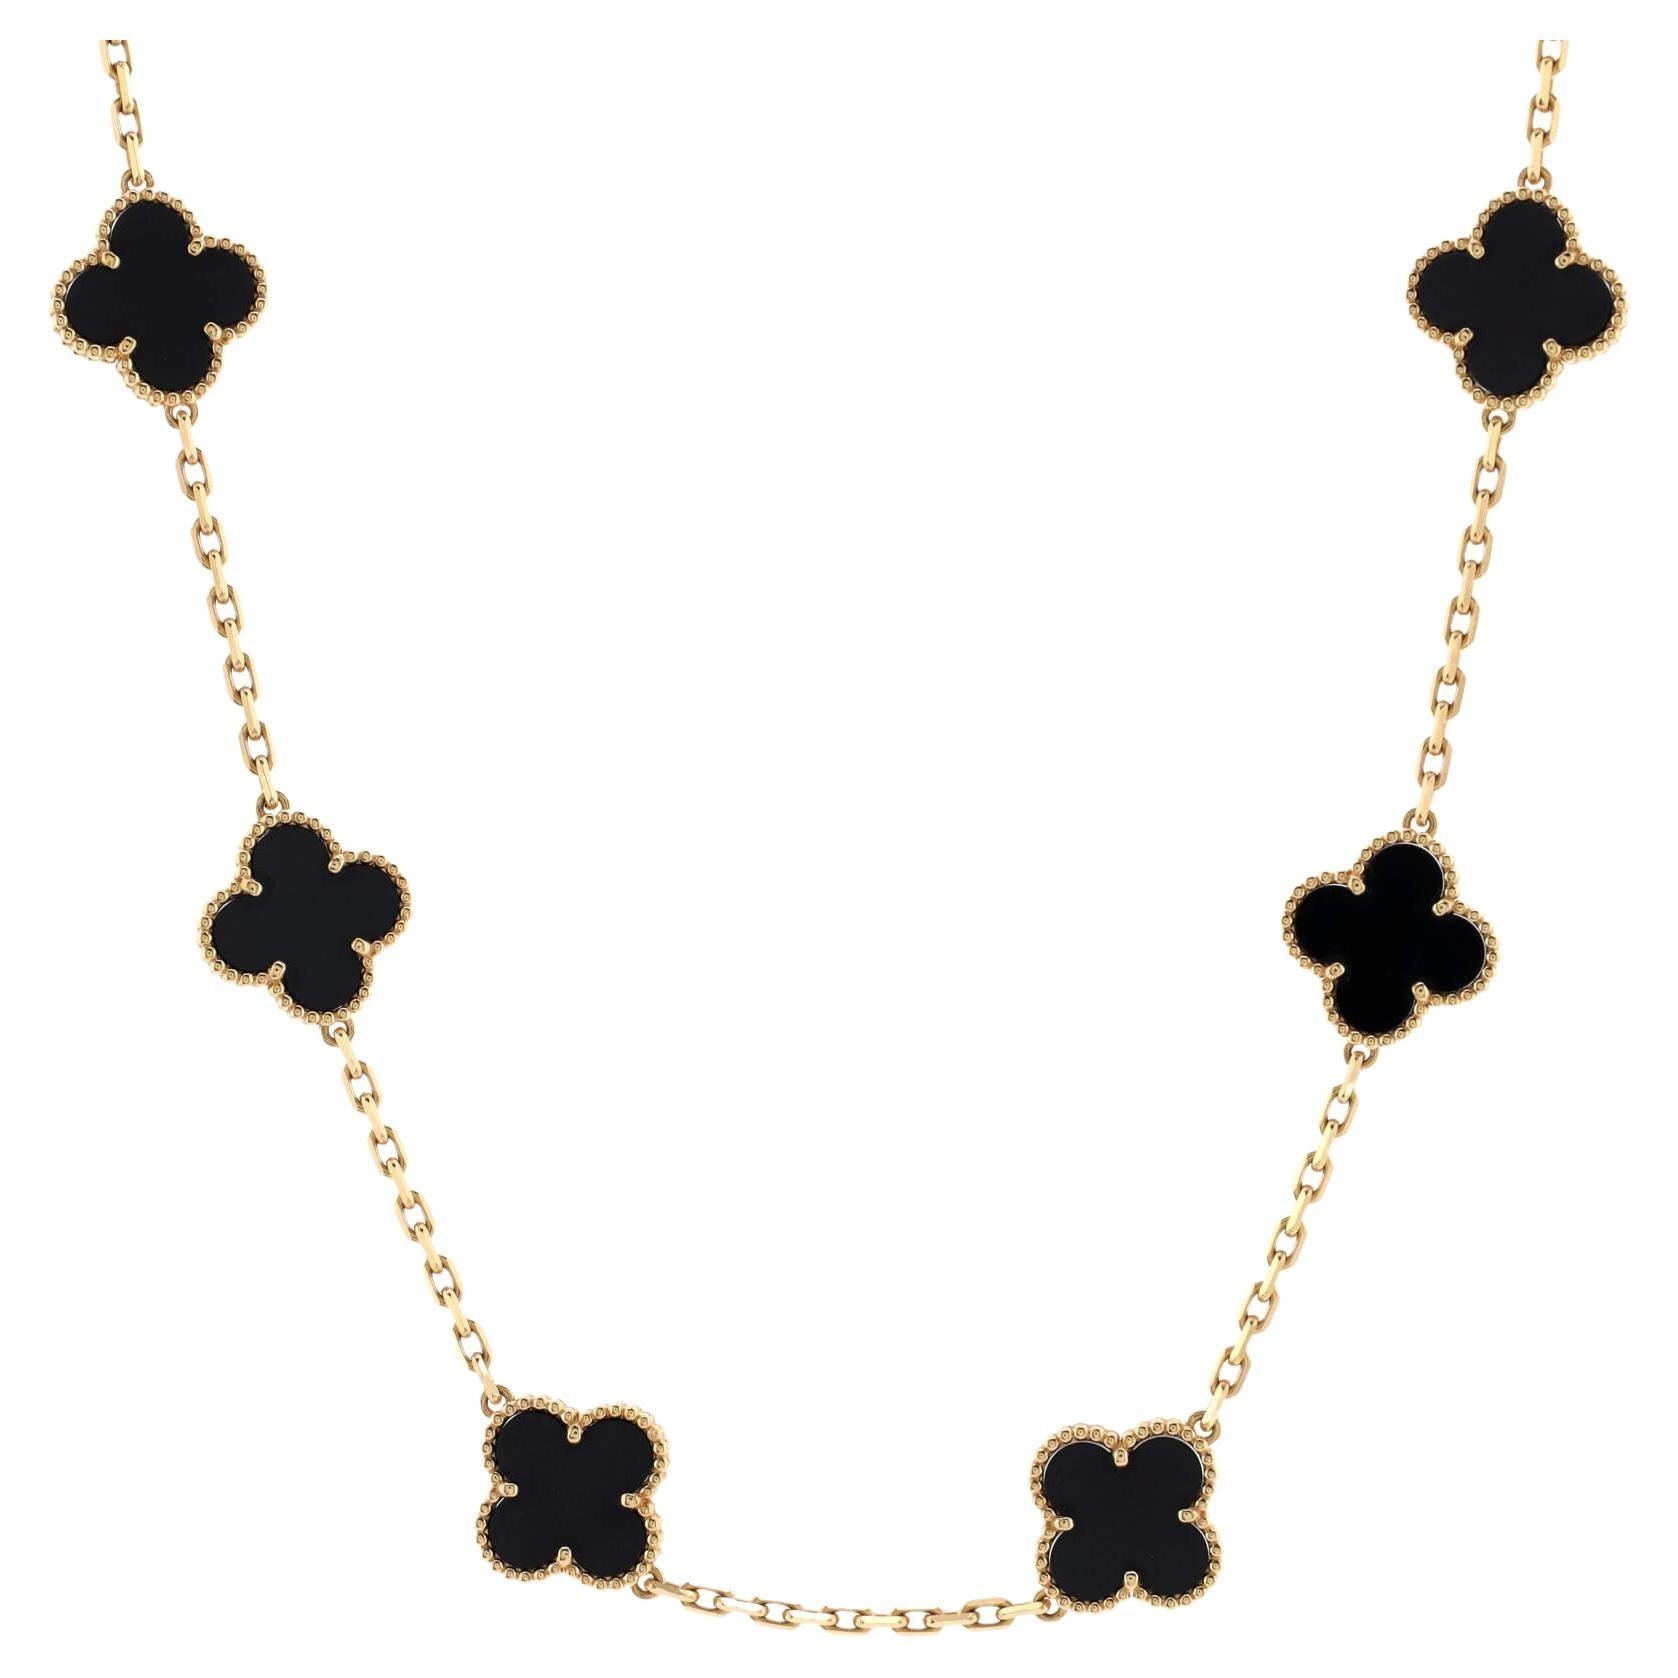 Van Cleef & Arpels Vintage Alhambra 10 Motifs Necklace 18K Yellow Gold and Onyx